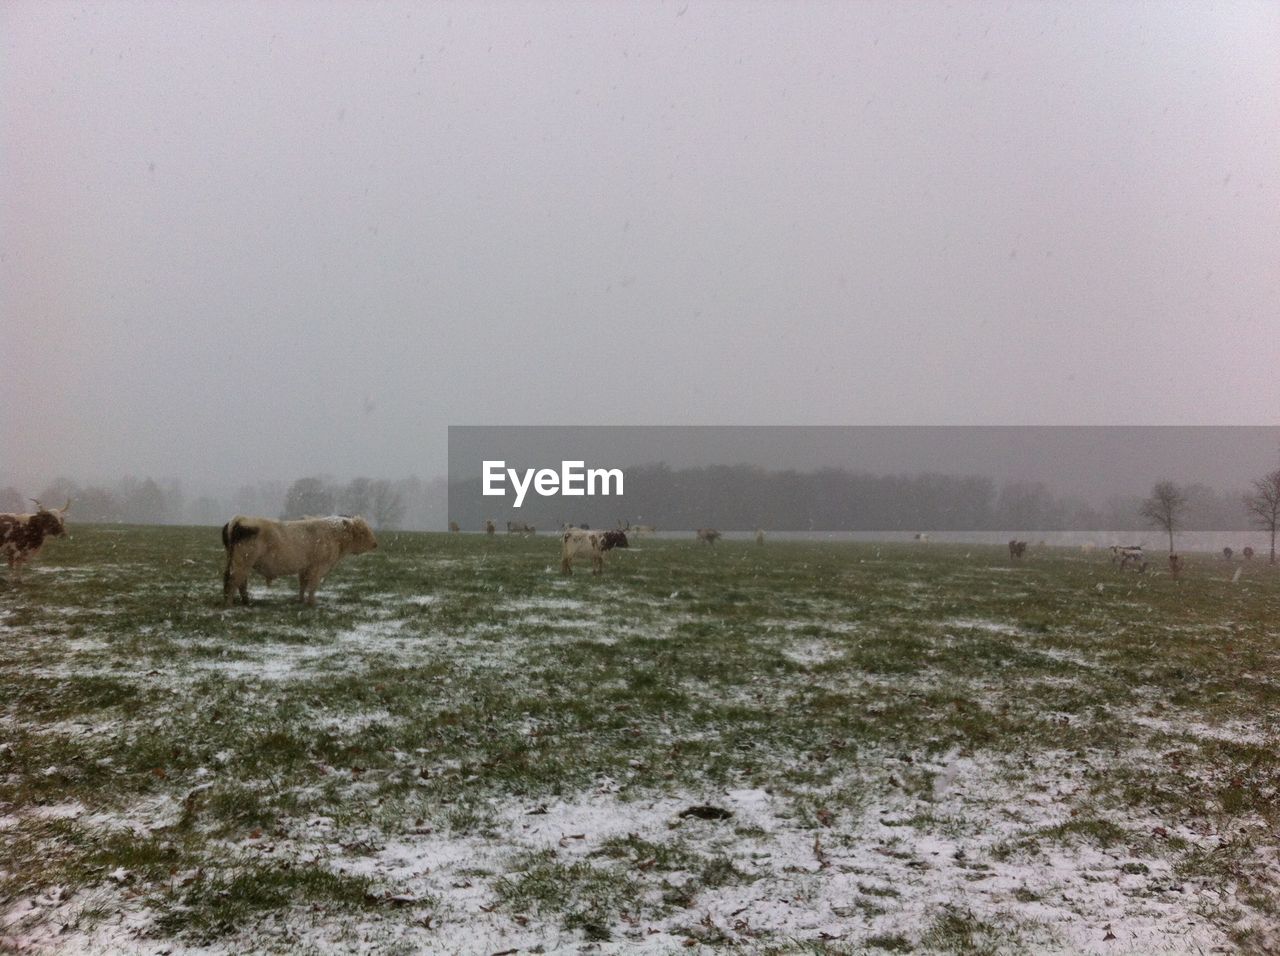 Cows on grassy field against clear sky during foggy weather